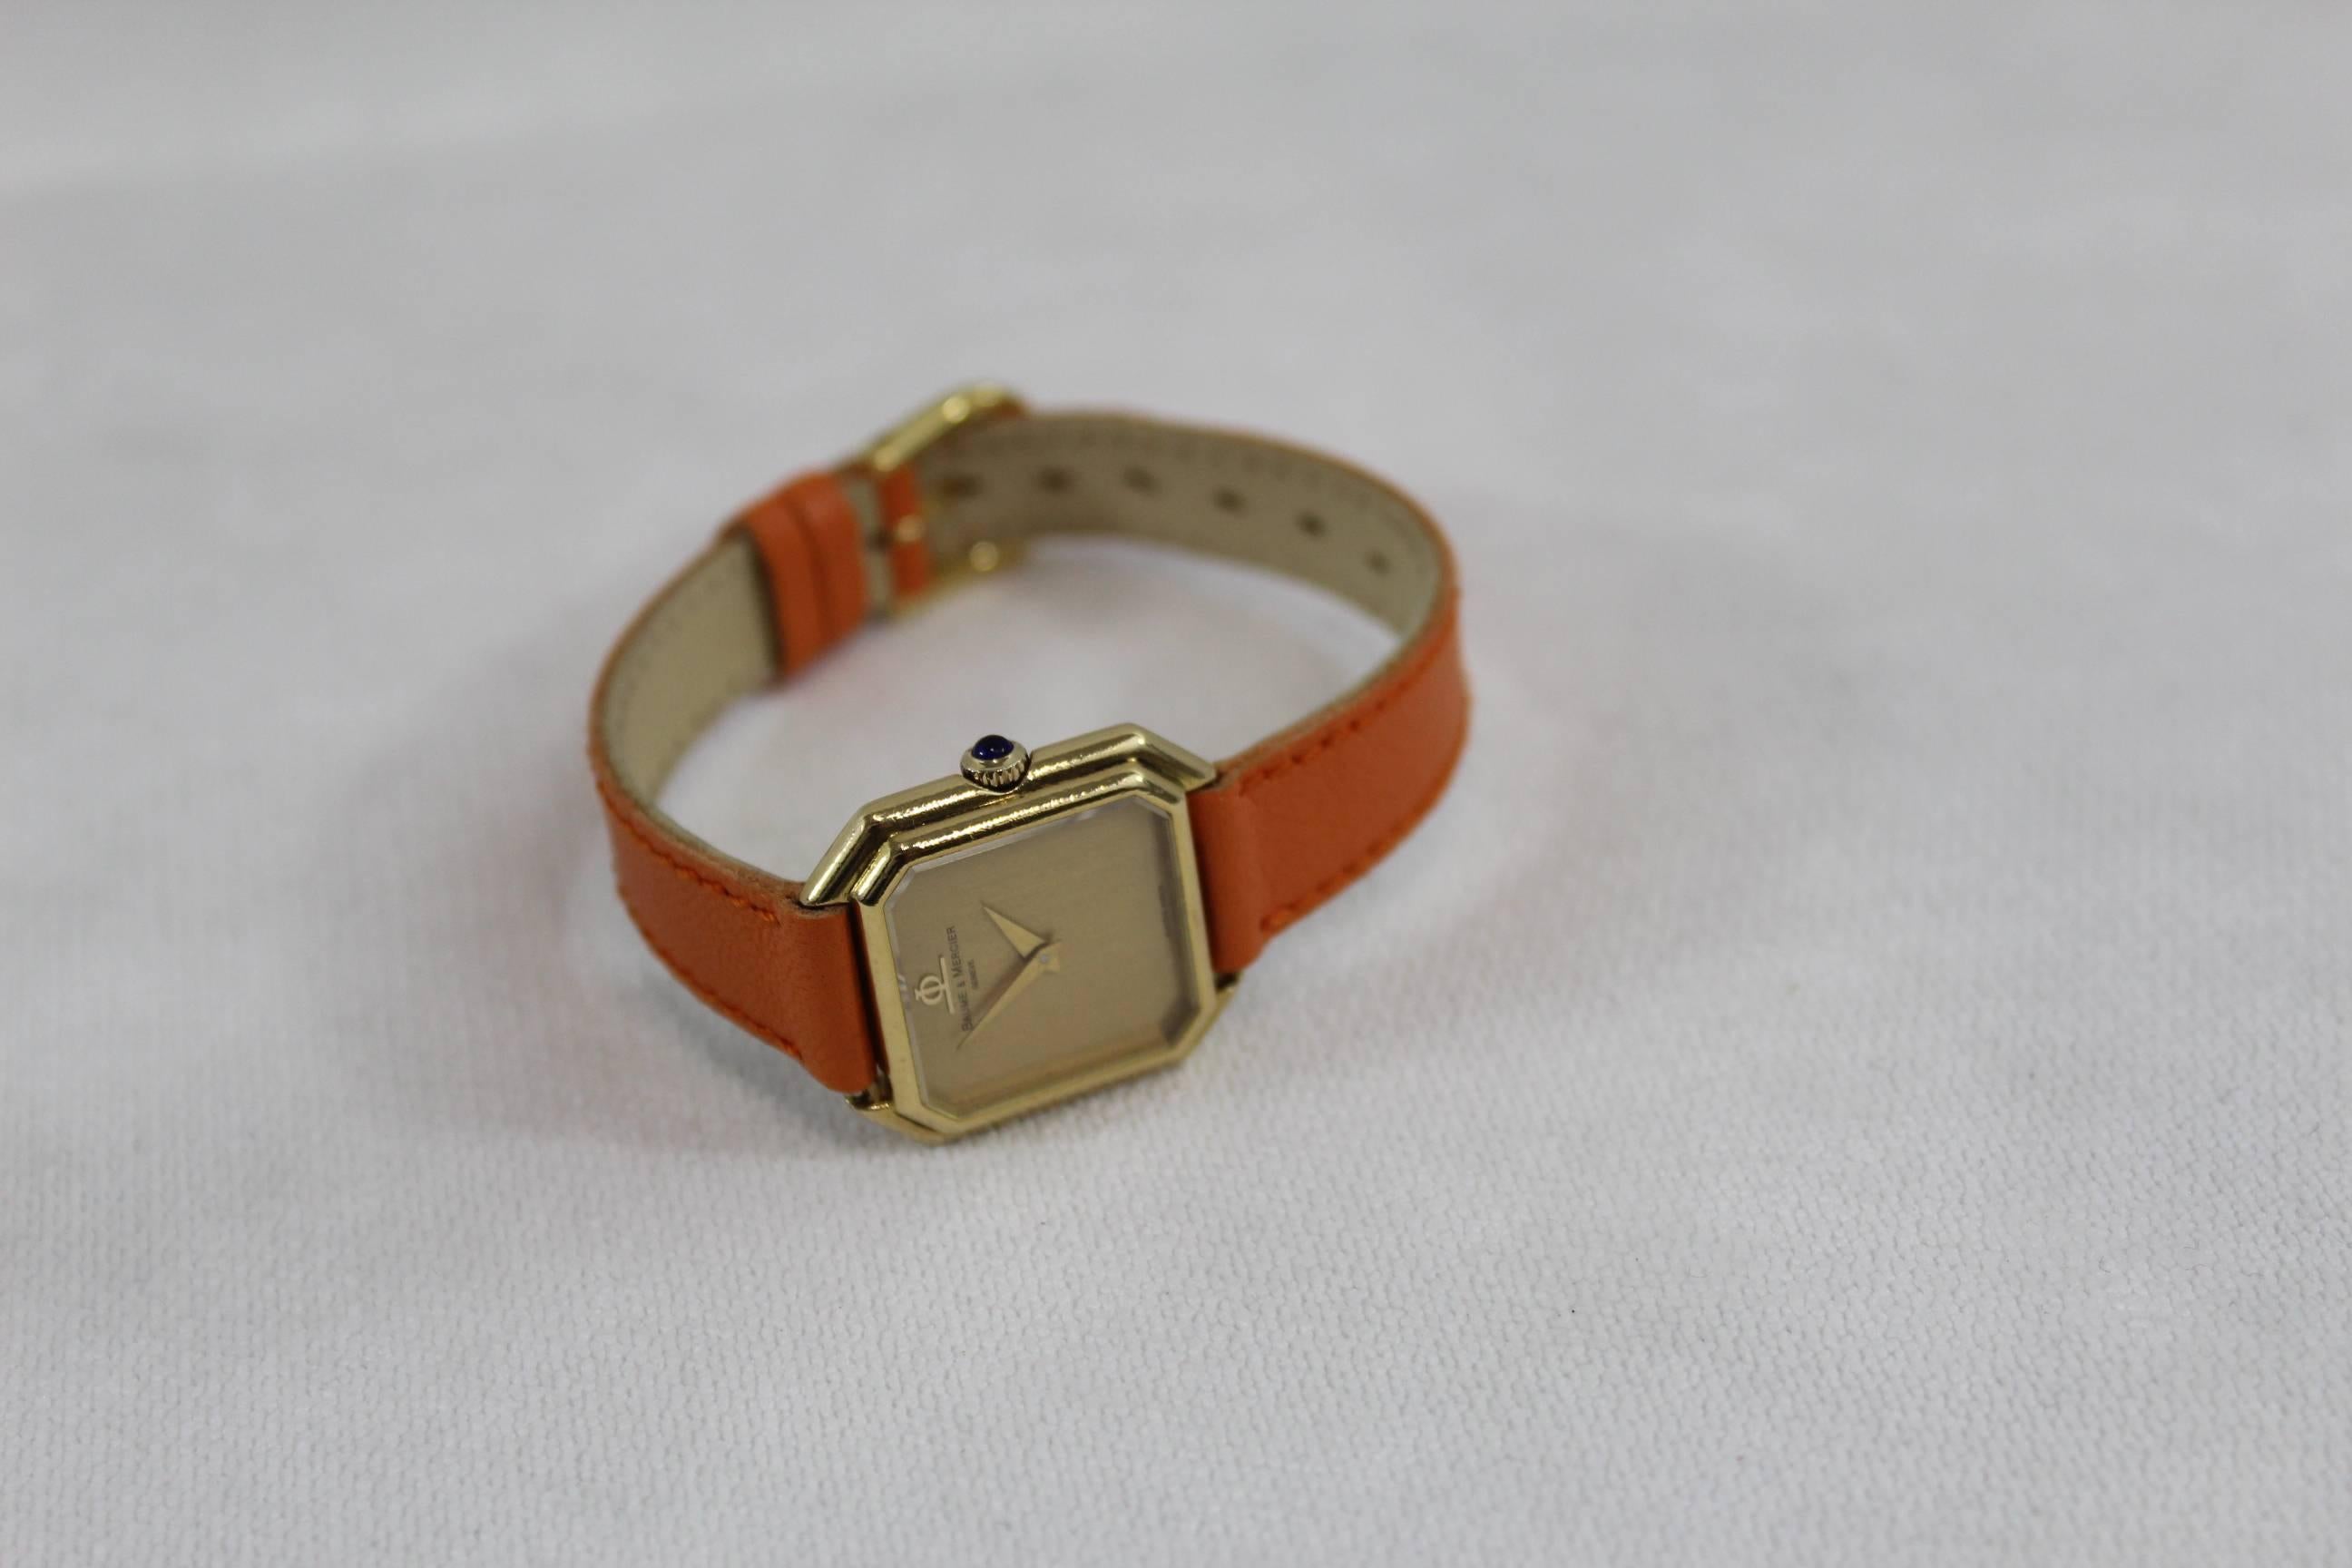 Vintage Baume & Mercier solid gold watch. 
Mechanical mouvement.
Good working condition
Small chock in the verre (see image)
Countermark leather band.